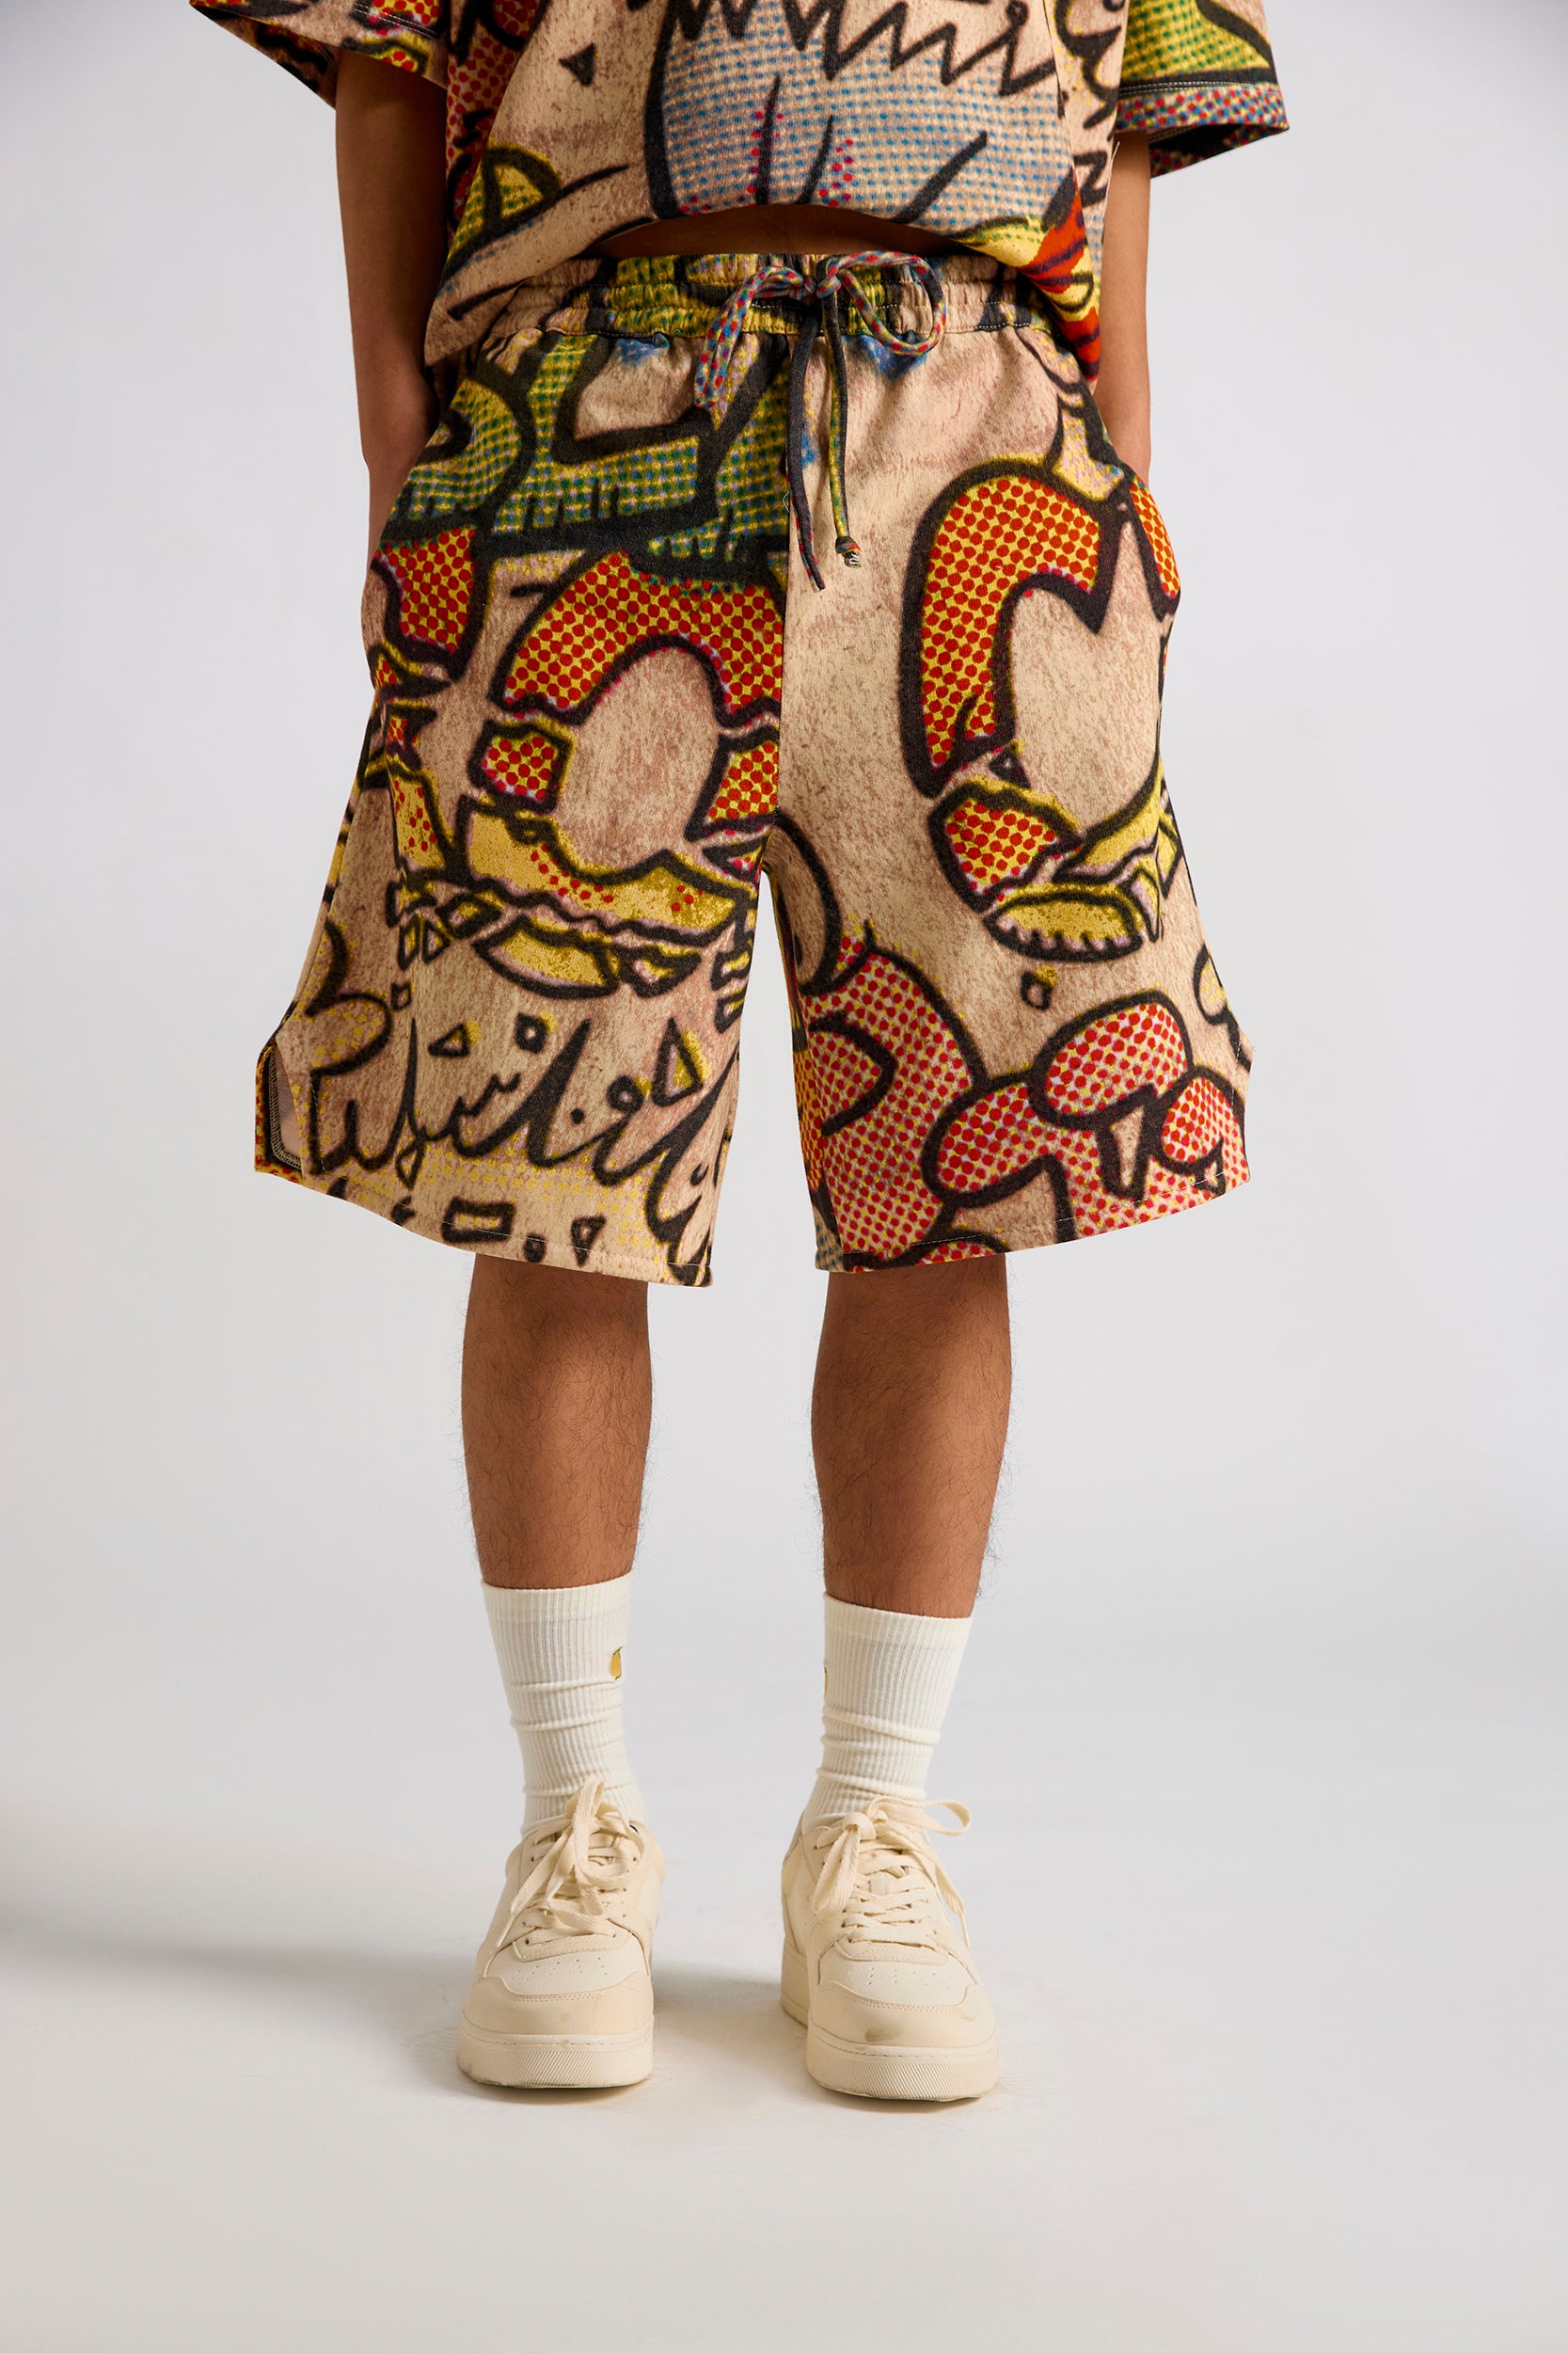 Garfield:Blown Out Printed Men's Oversized T-Shirt and Shorts Set